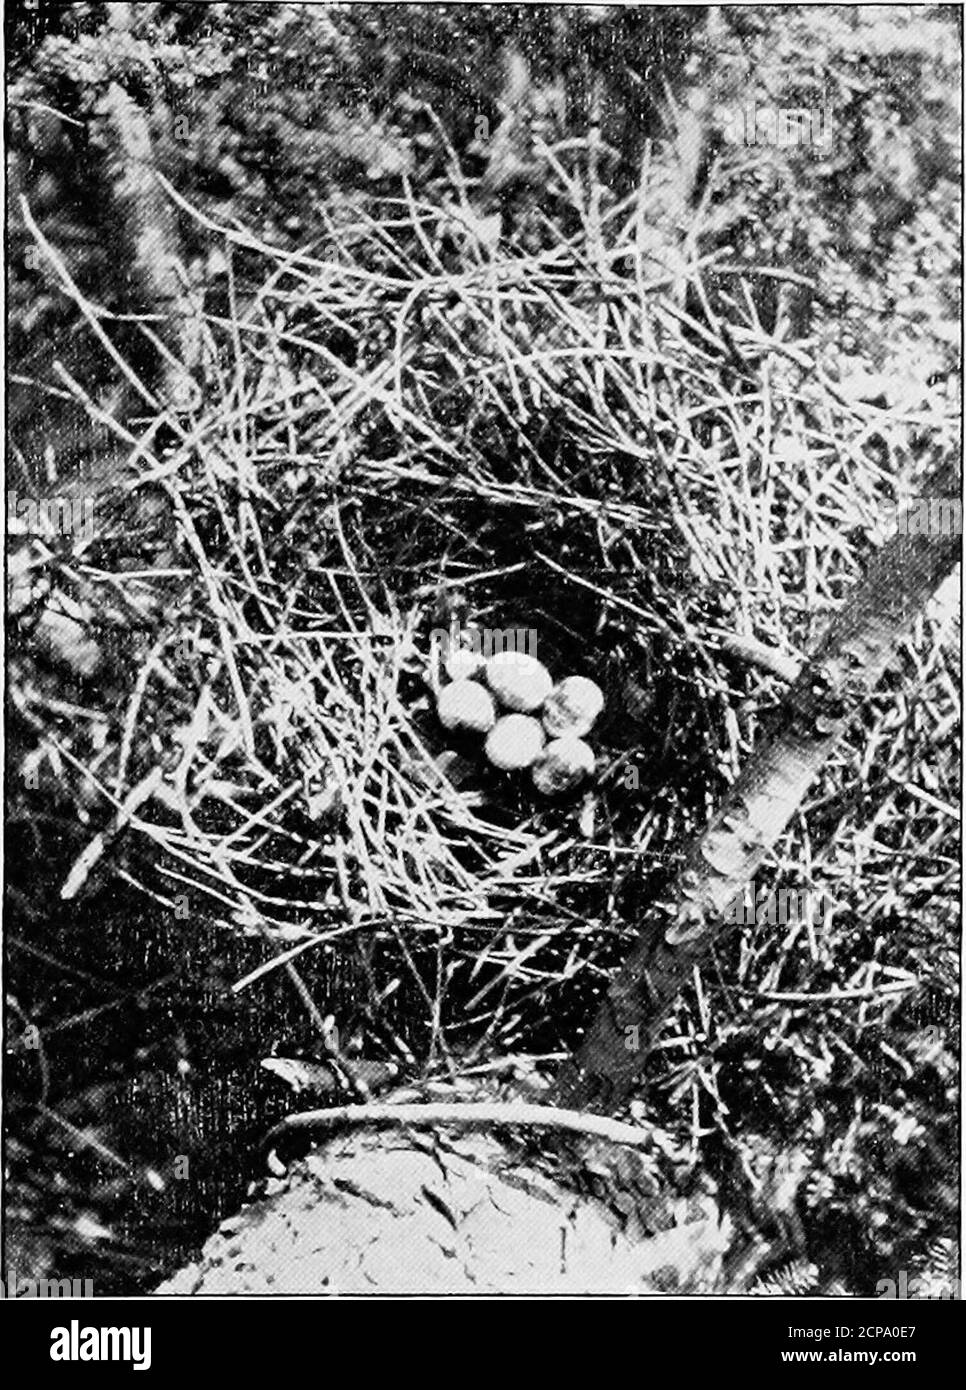 . Birds of New York . the eggs. It is composedof sticks, usually of the pine andhemlock, and lined with smallertwigs and strips of bark. Theeggs are usually laid by the lothor 25th of May. They are 4 or 5in number, oval or short ovate inshape, averaging 1.47 by 1.16inches in size, and bluish whiteor greenish white in ground color,more or less heavily blotched andspotted with brown of differentshades mingled with marblings ofdrab or lavender and clay color.These markings are sometimes Photo by Guy A. BaileySharp-shinned hawks nest and eggs Unifomily distributcd OVCr thC surface of the egg, some Stock Photo